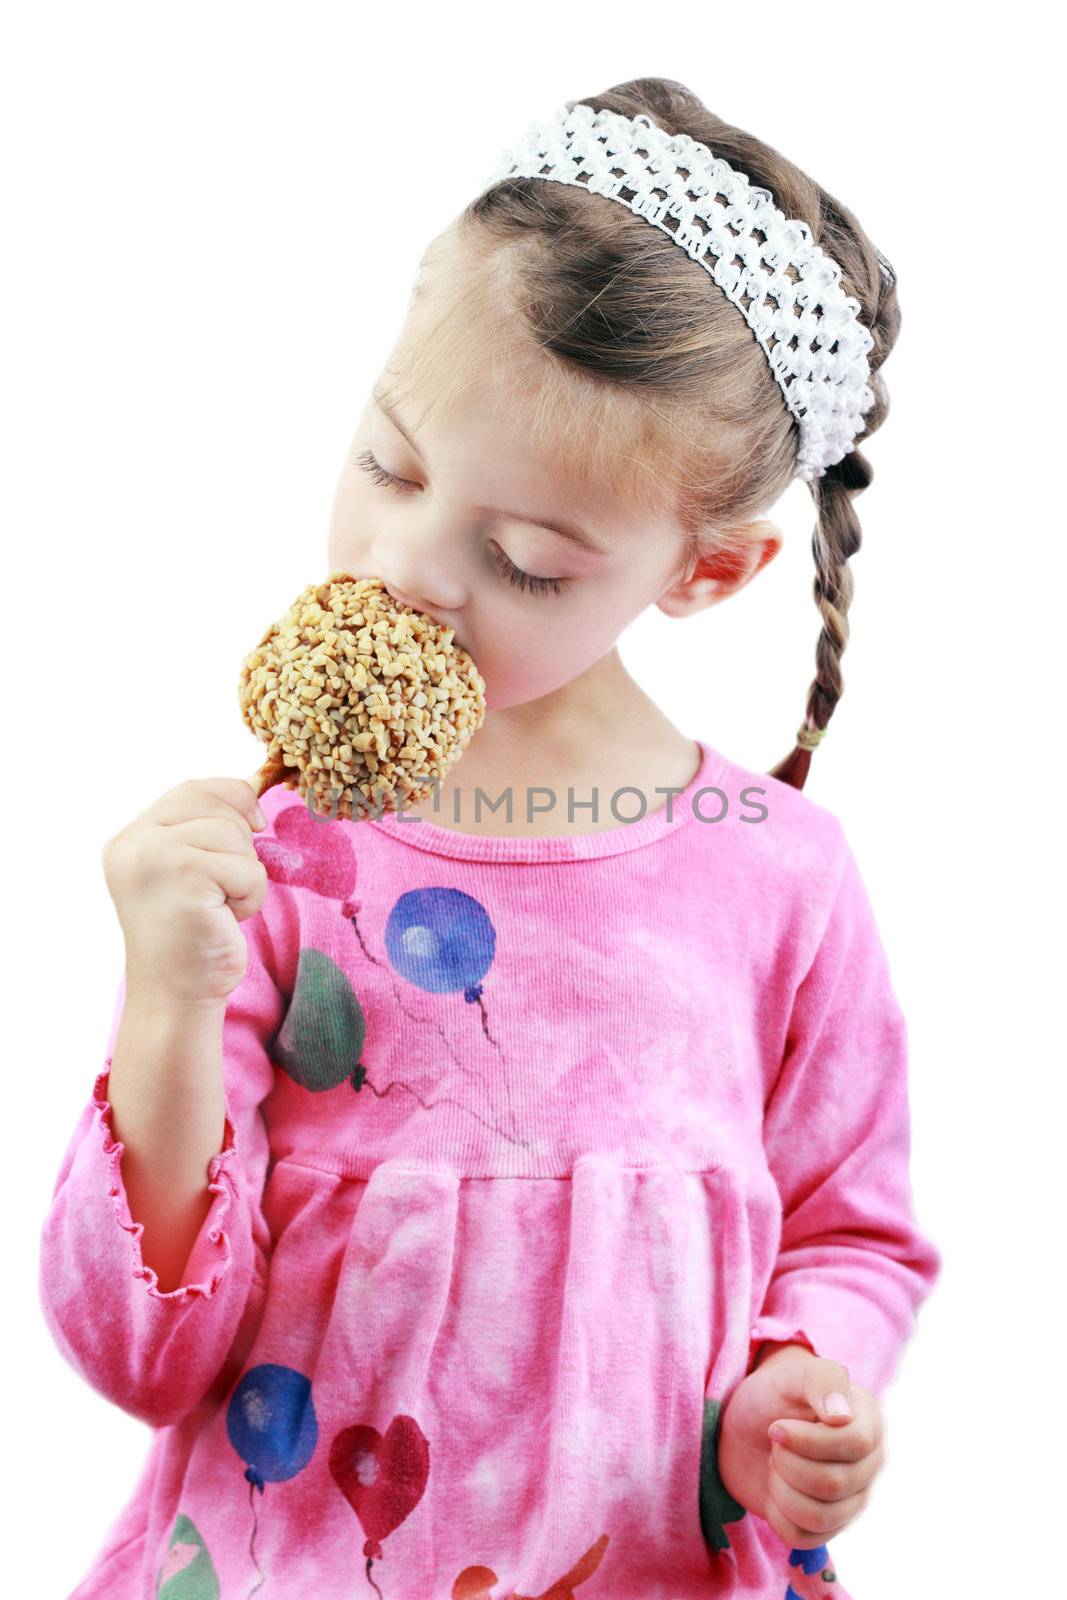 Adorable little girl eats a caramel apple against a white background.